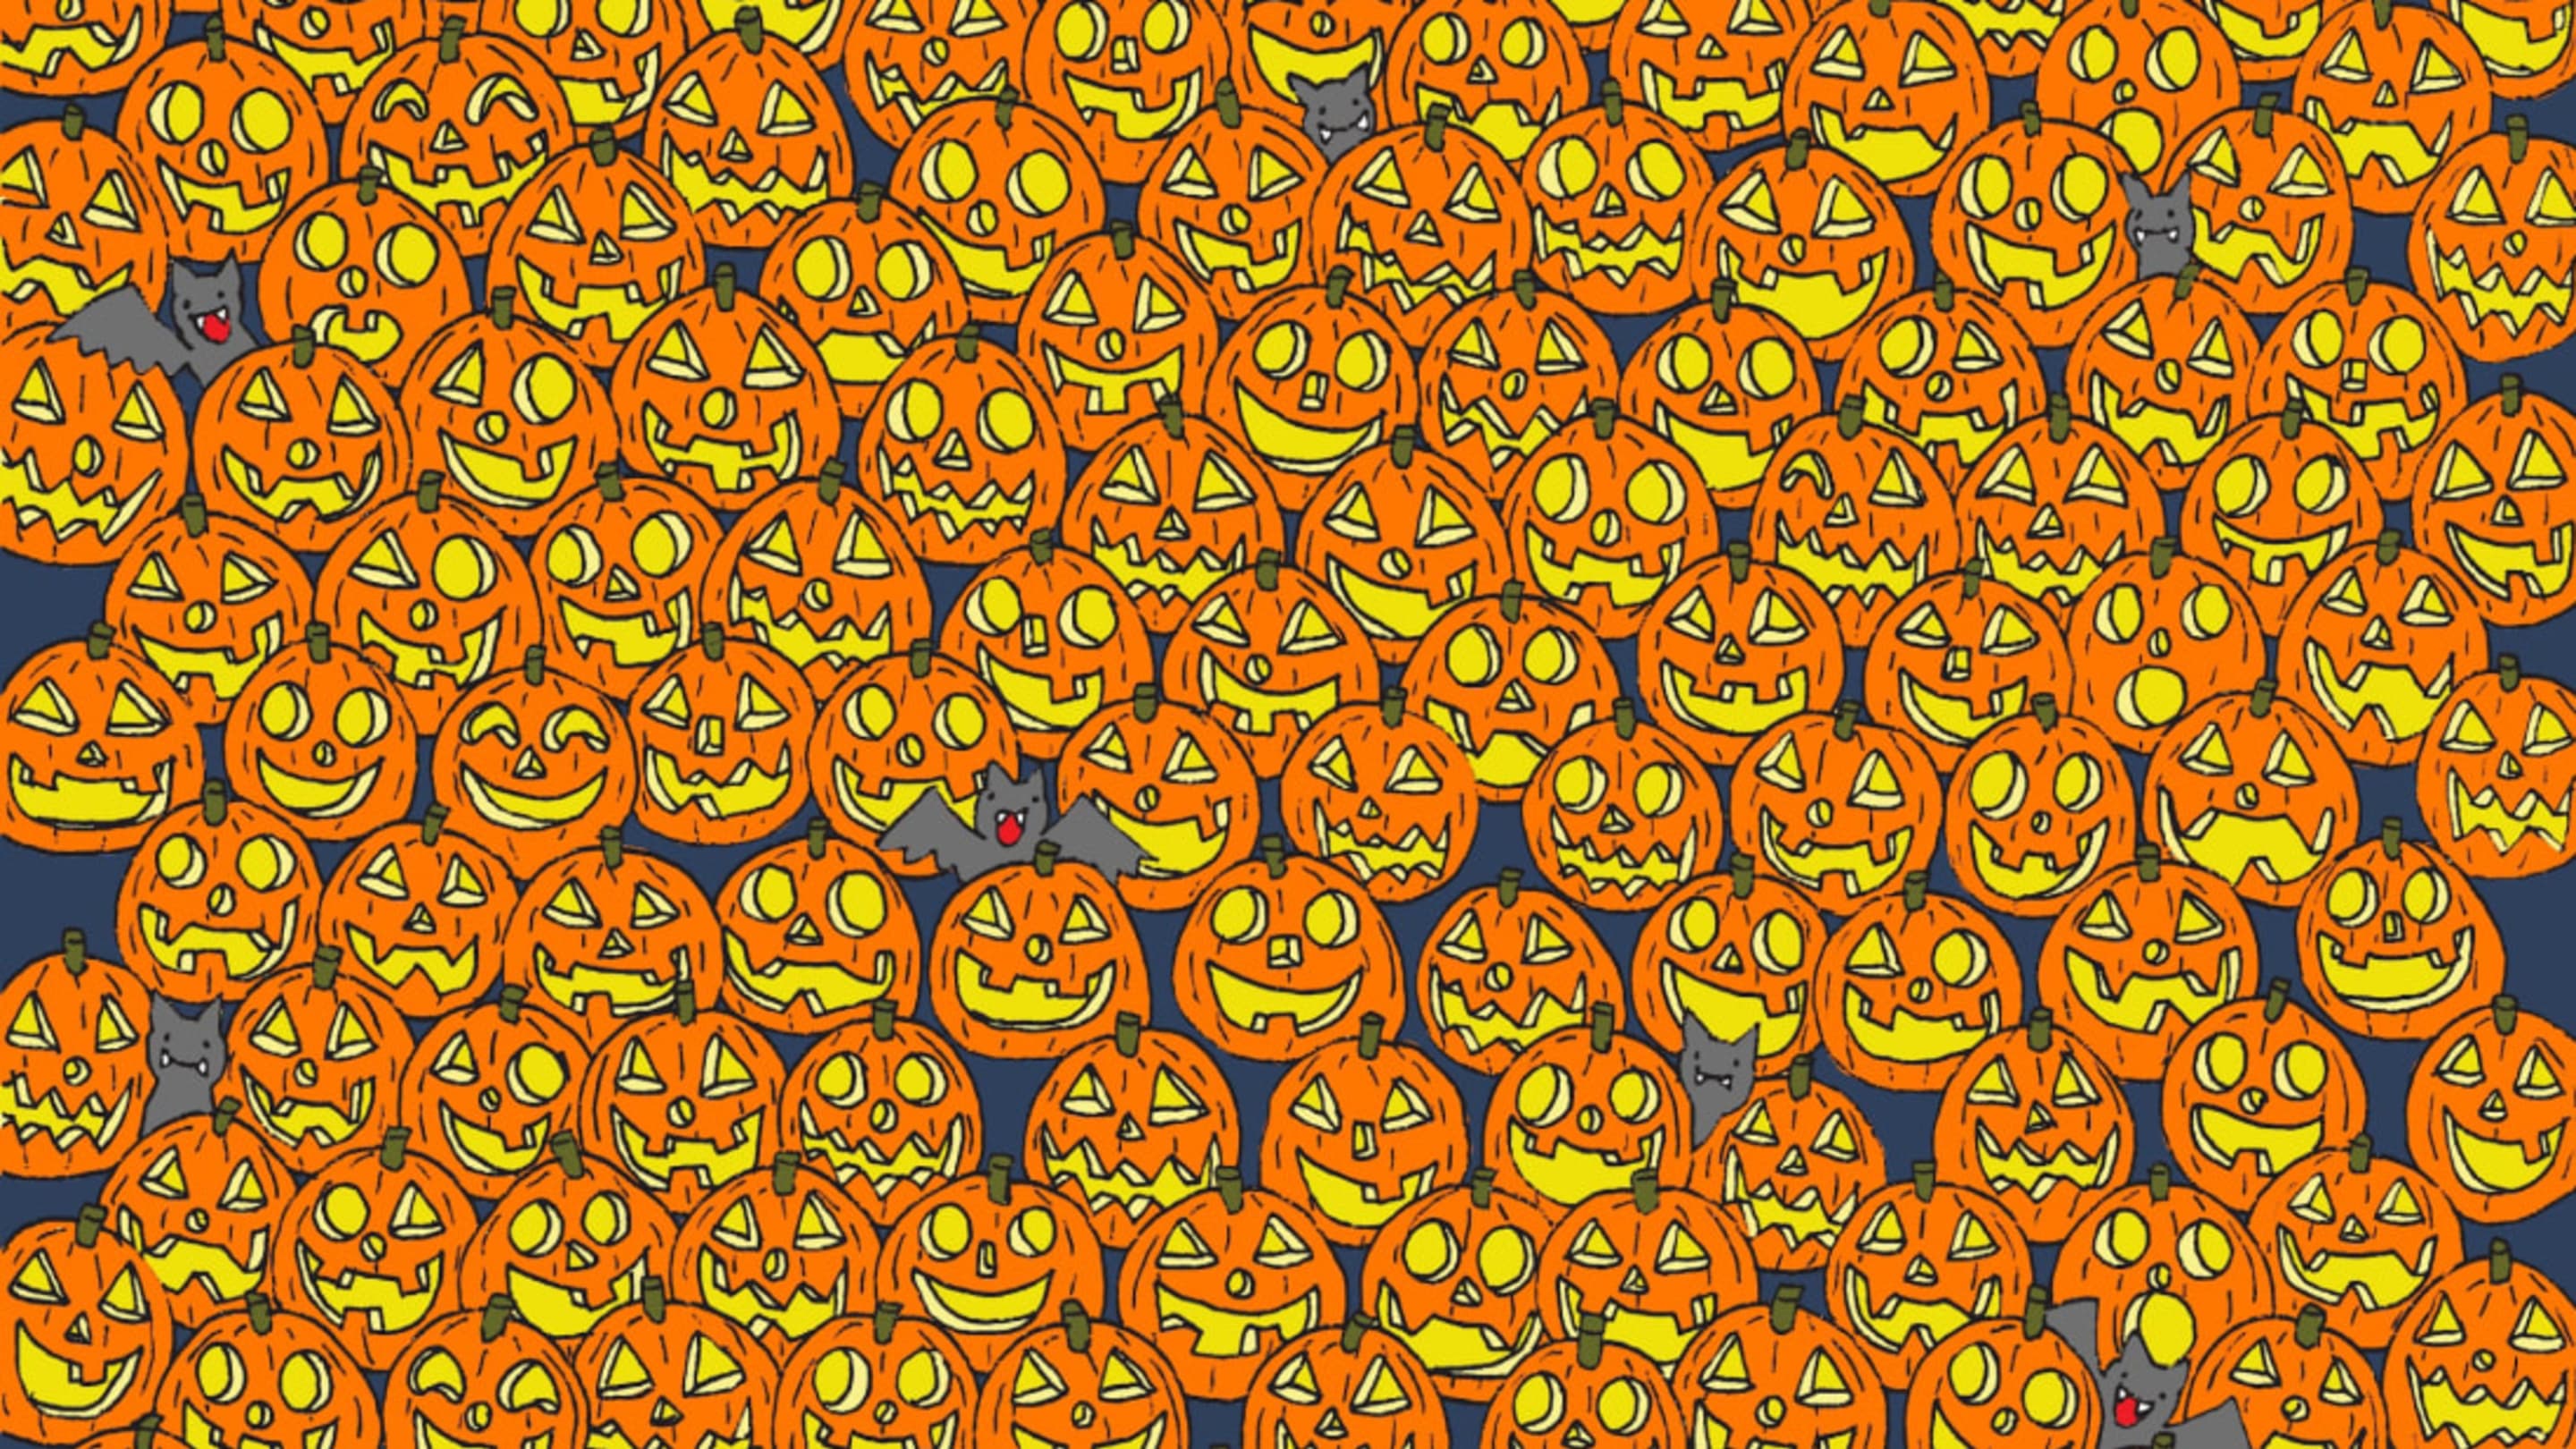 Can You Spot the Nose-Less Jack-o'-Lantern?